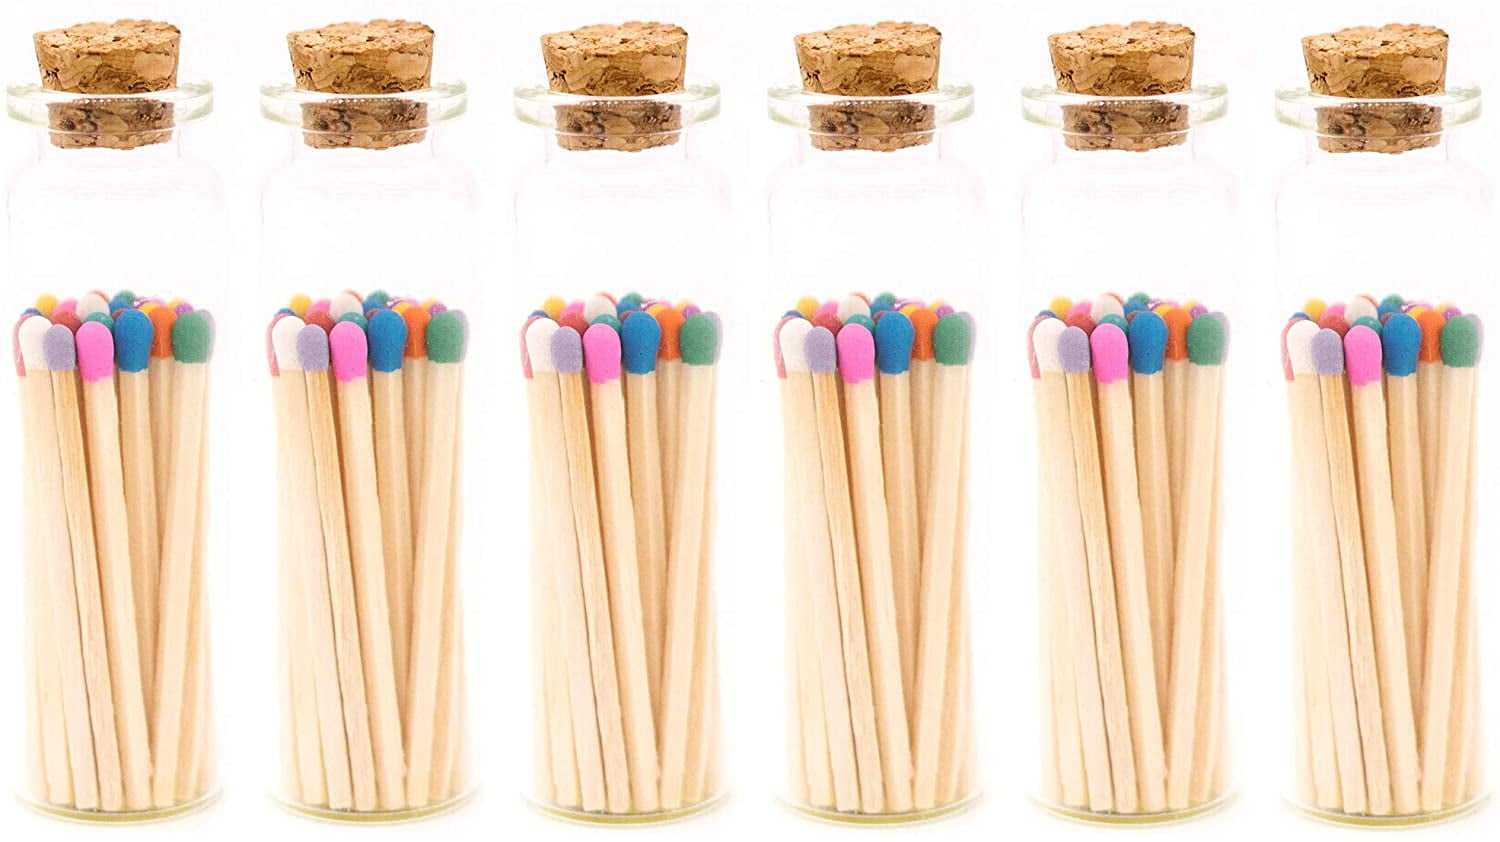 Multicolor Rainbow Blend Decorative Matches 120 Small Premium Wooden  Matches Artisan Matches for Candles Safety Matches for Lighting Candles  with